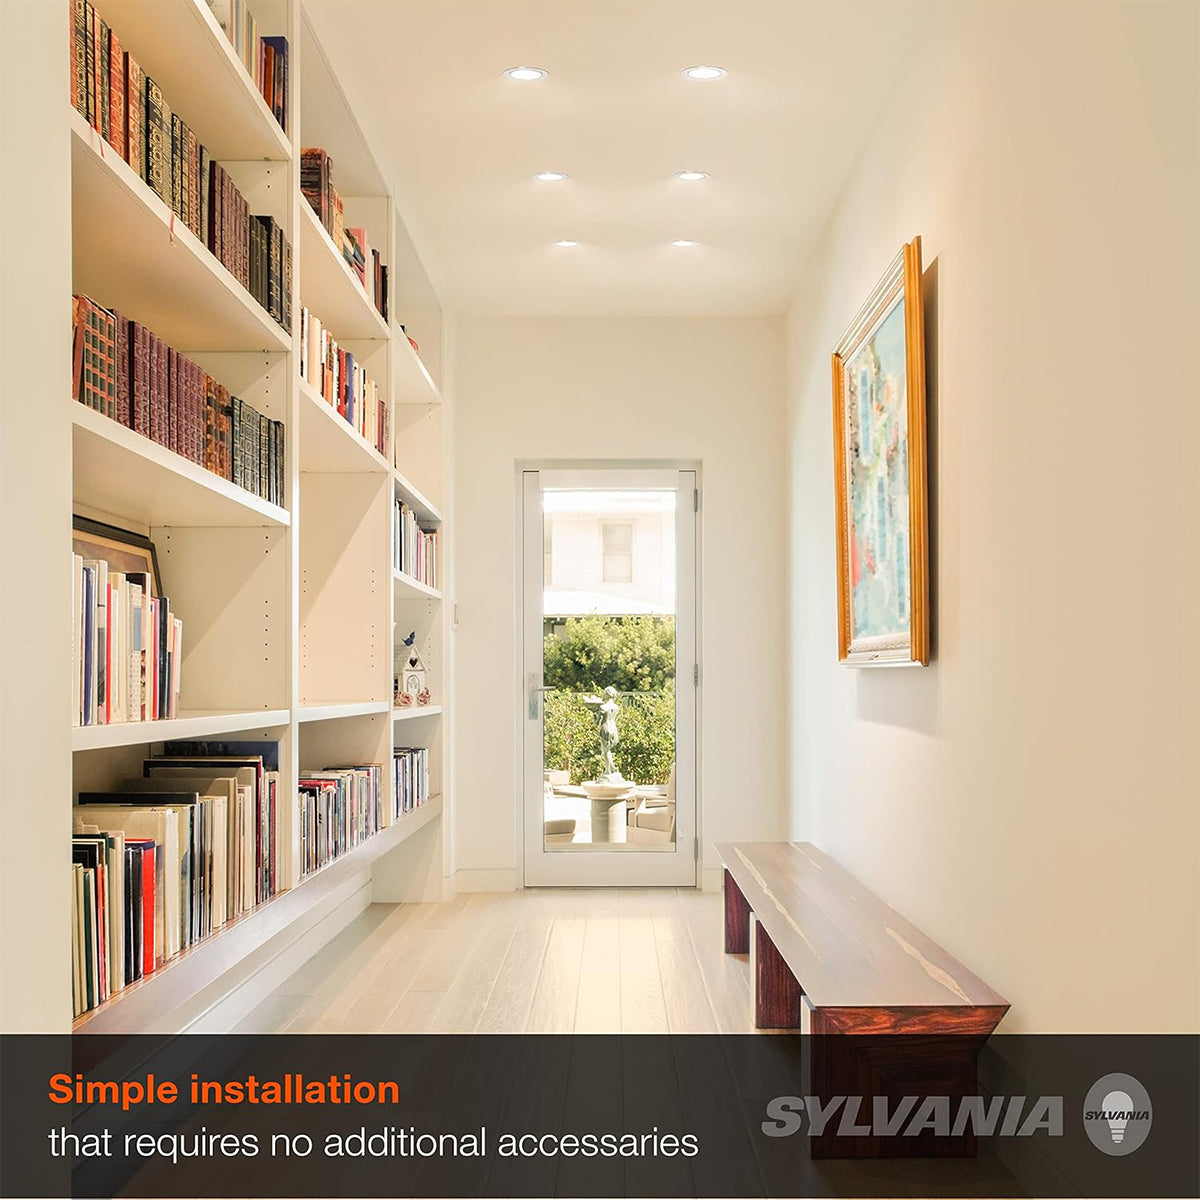 4'' Recessed LED Retrofit Can Light, 50W Equal, 550 Lumens, 3000K, Smooth White Trim (Pack of 12)